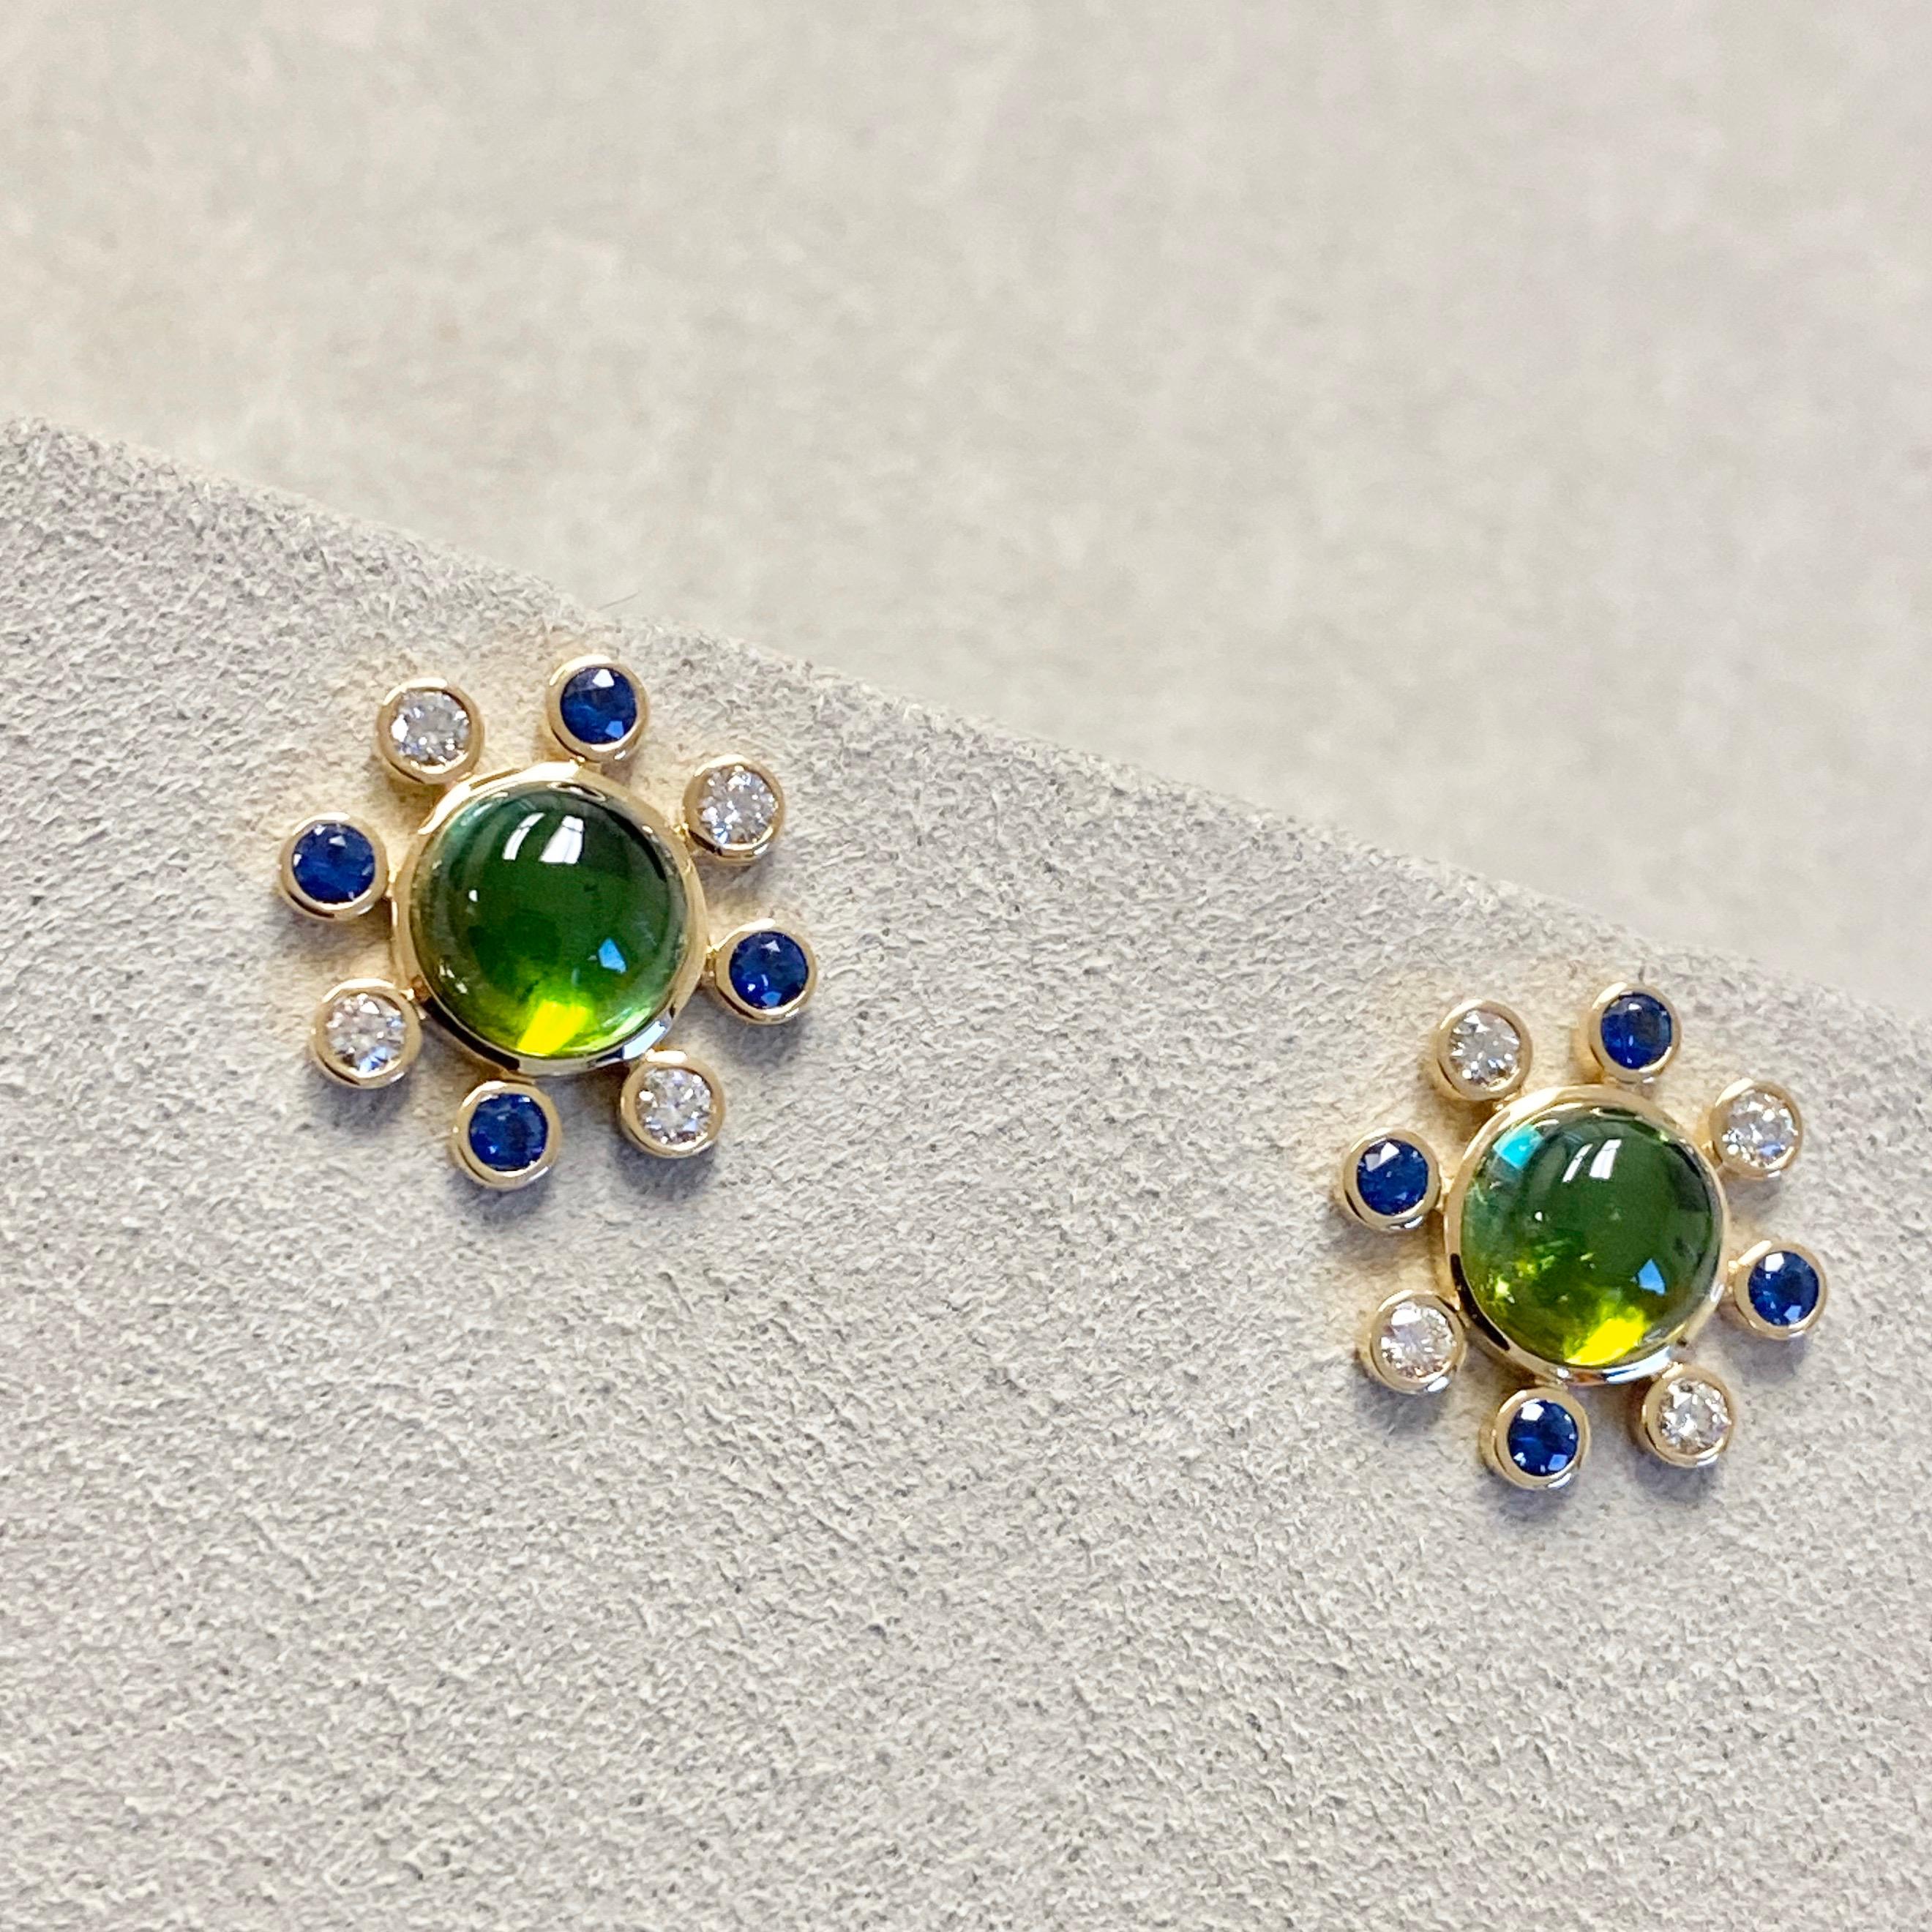 Created in 18 karat yellow gold
Green tourmaline 4 cts approx
Blue sapphire 0.50 ct approx
Diamonds 0.40 cts approx
Limited edition

Adorn your ears with these exquisite Candy Blue Topaz & Diamond earrings, crafted with 18 karat yellow gold and